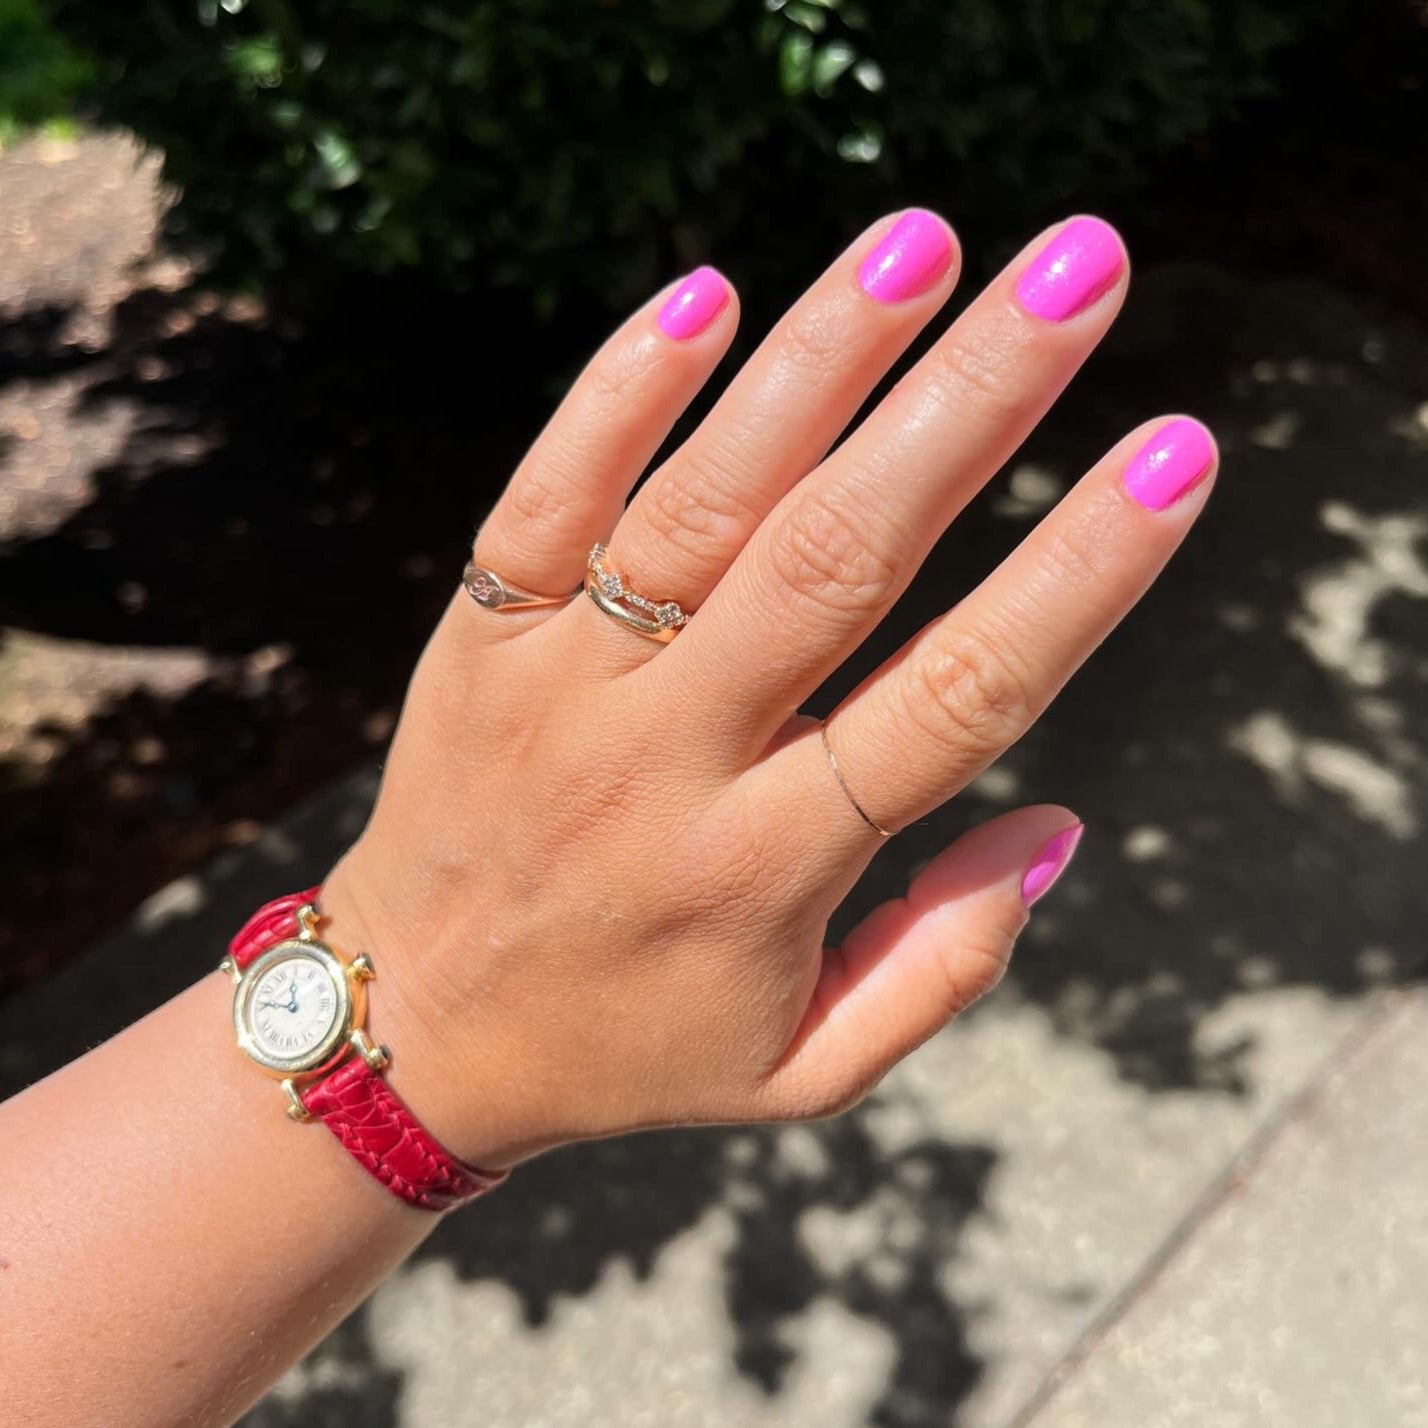 It’s a Girl Thing - Shimmer Bright Pink